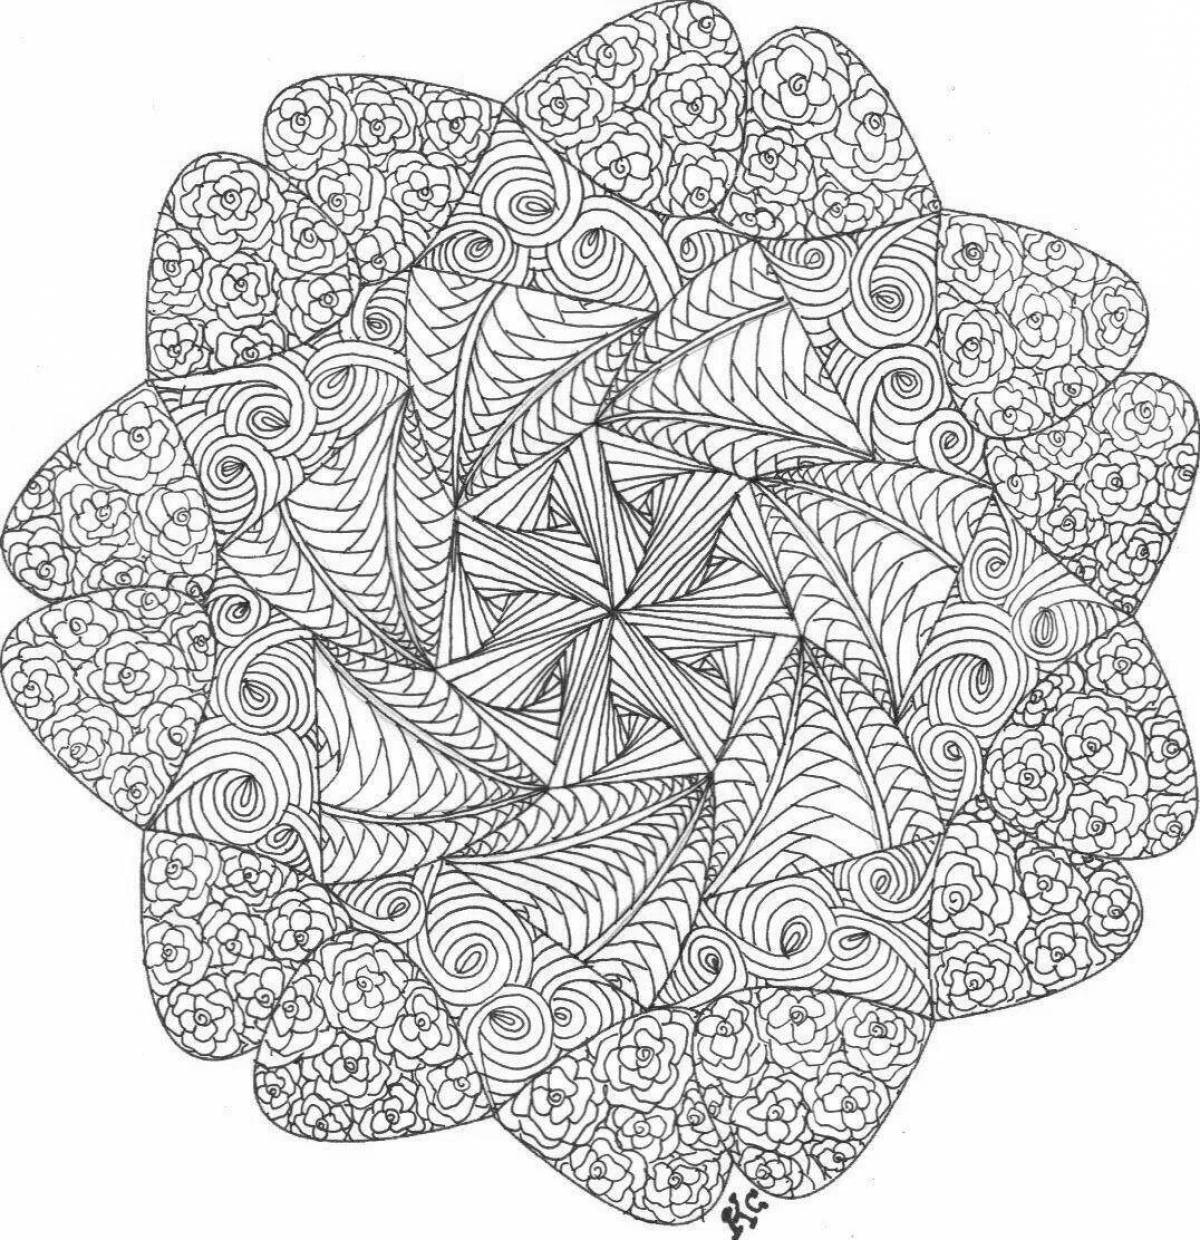 Fascinating anti-stress art therapy coloring page